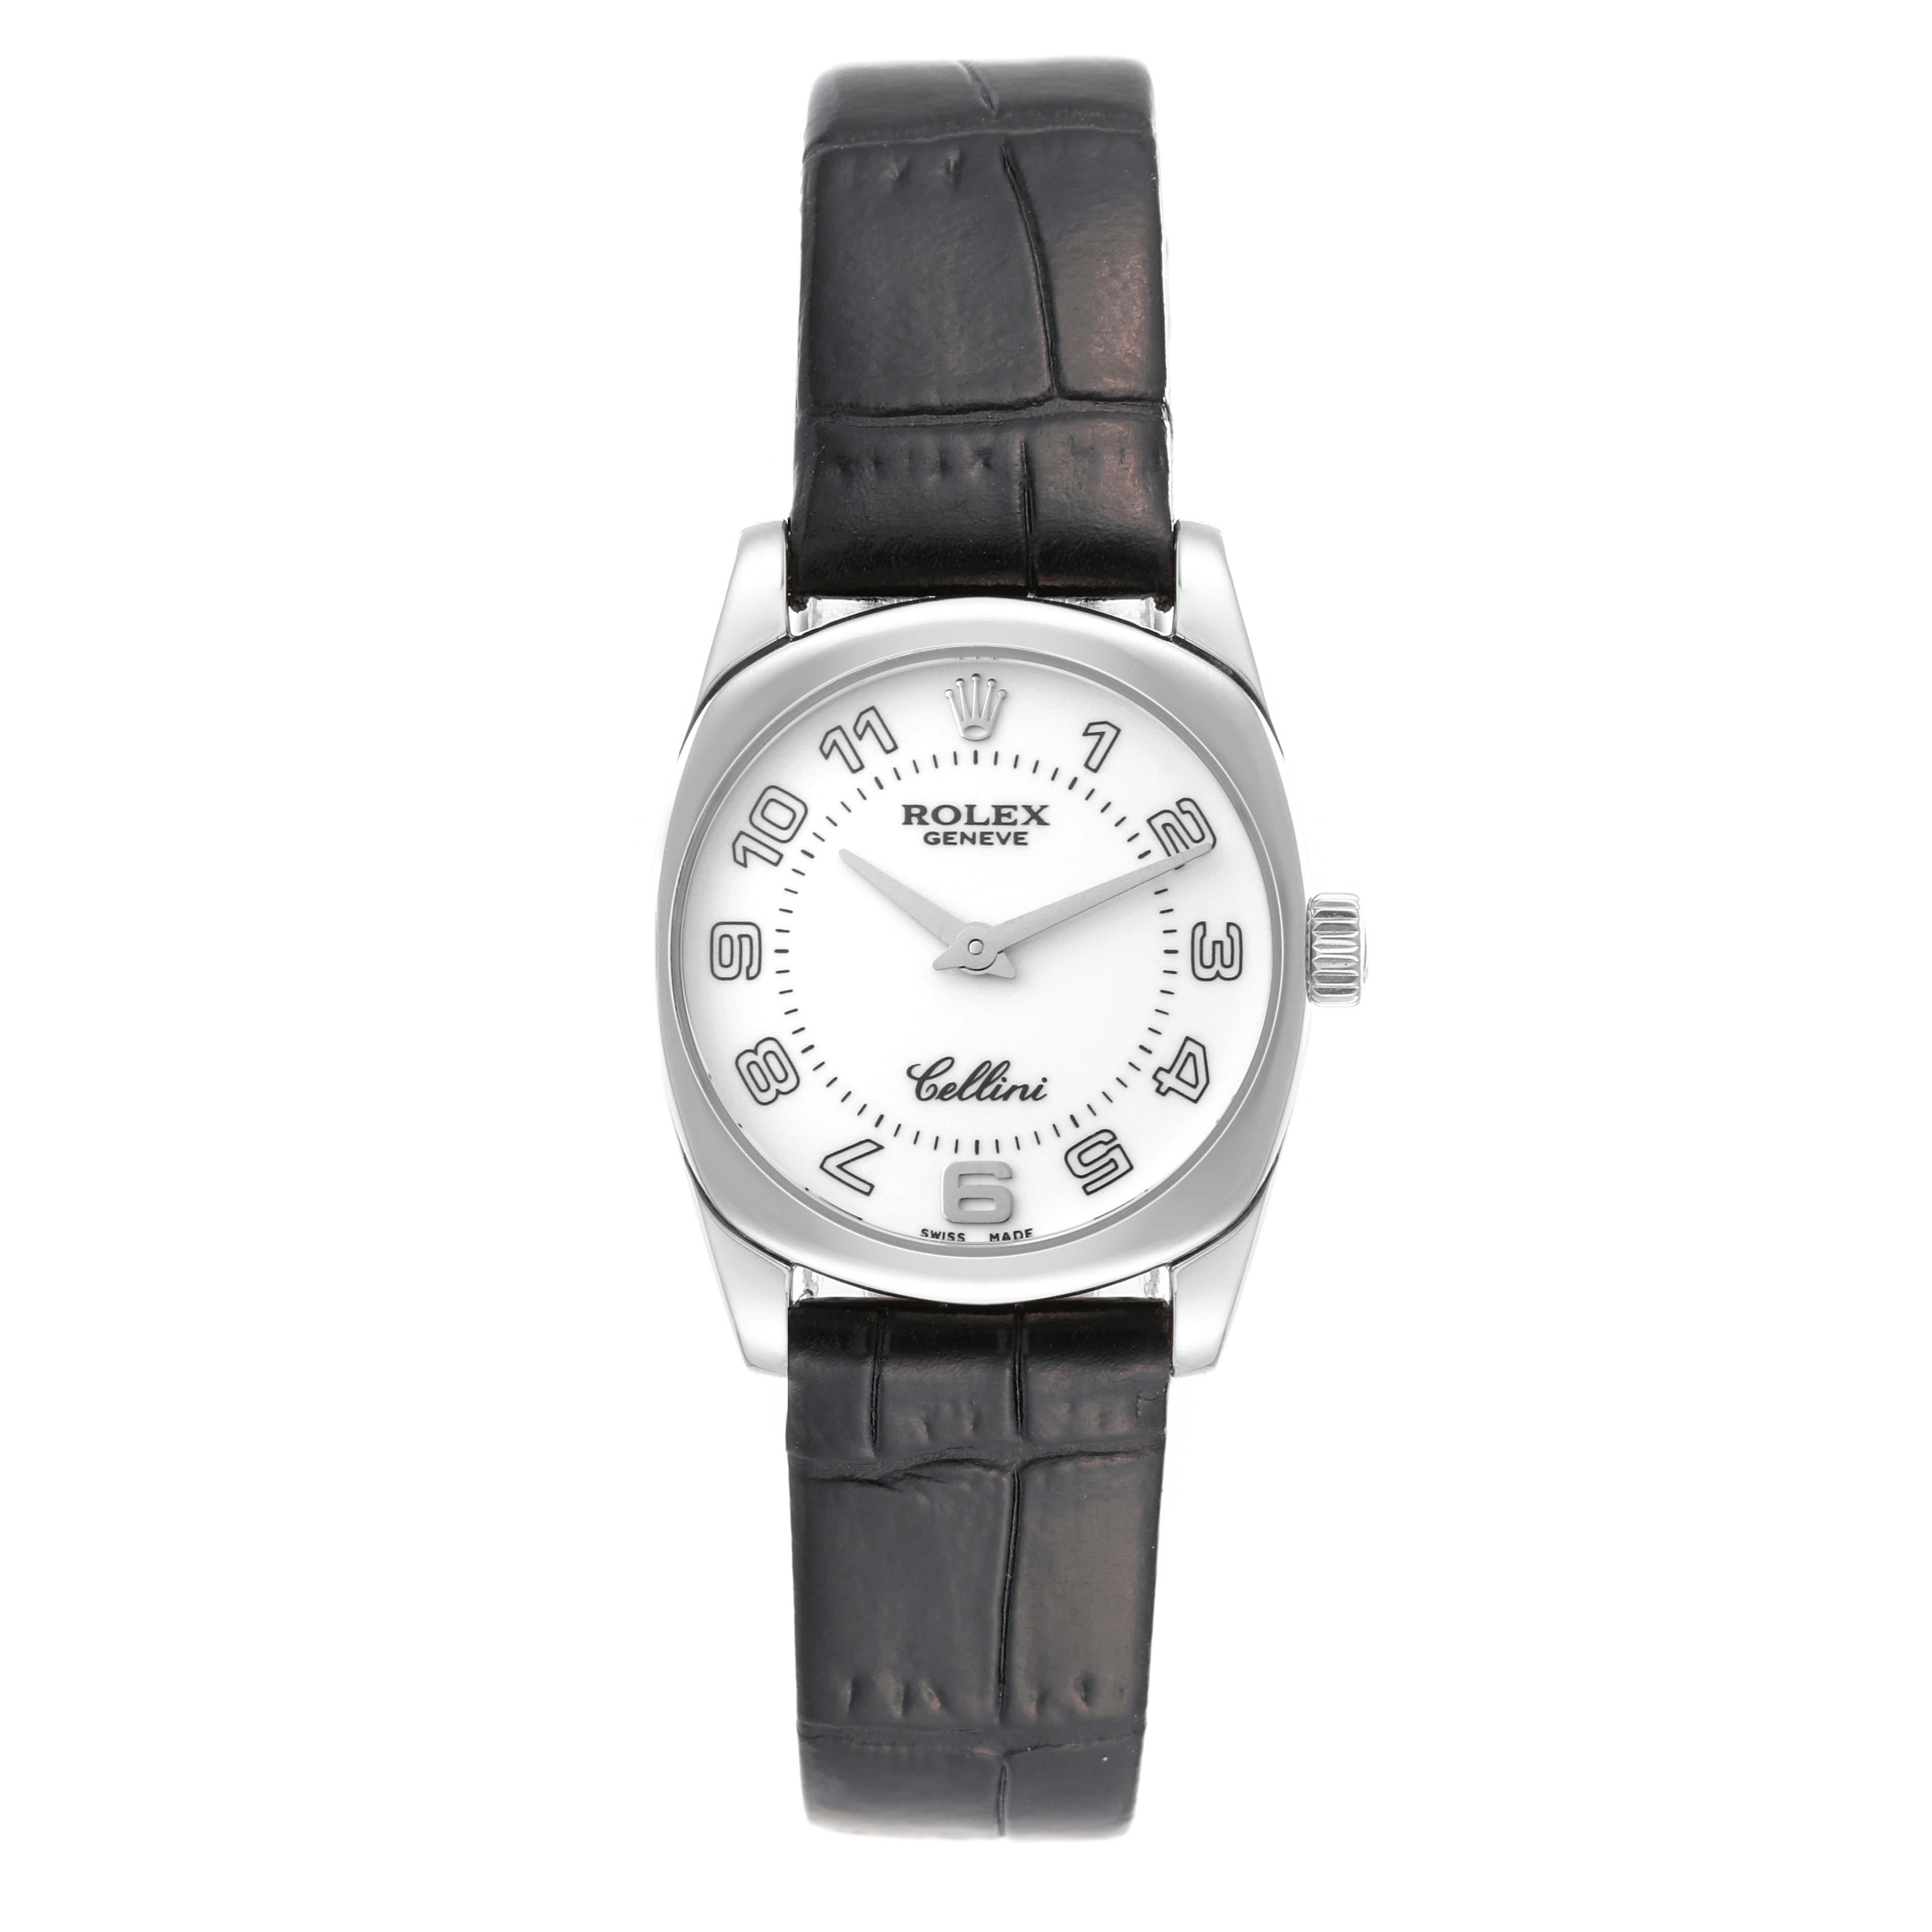 Rolex Cellini Danaos White Gold Black Strap Ladies Watch 6229. Quartz movement. 18k white gold rounded rectangular case 26.5 mm. Rolex logo on the crown. 18k white gold bezel. Scratch resistant sapphire crystal. White dial with Arabic numerals and